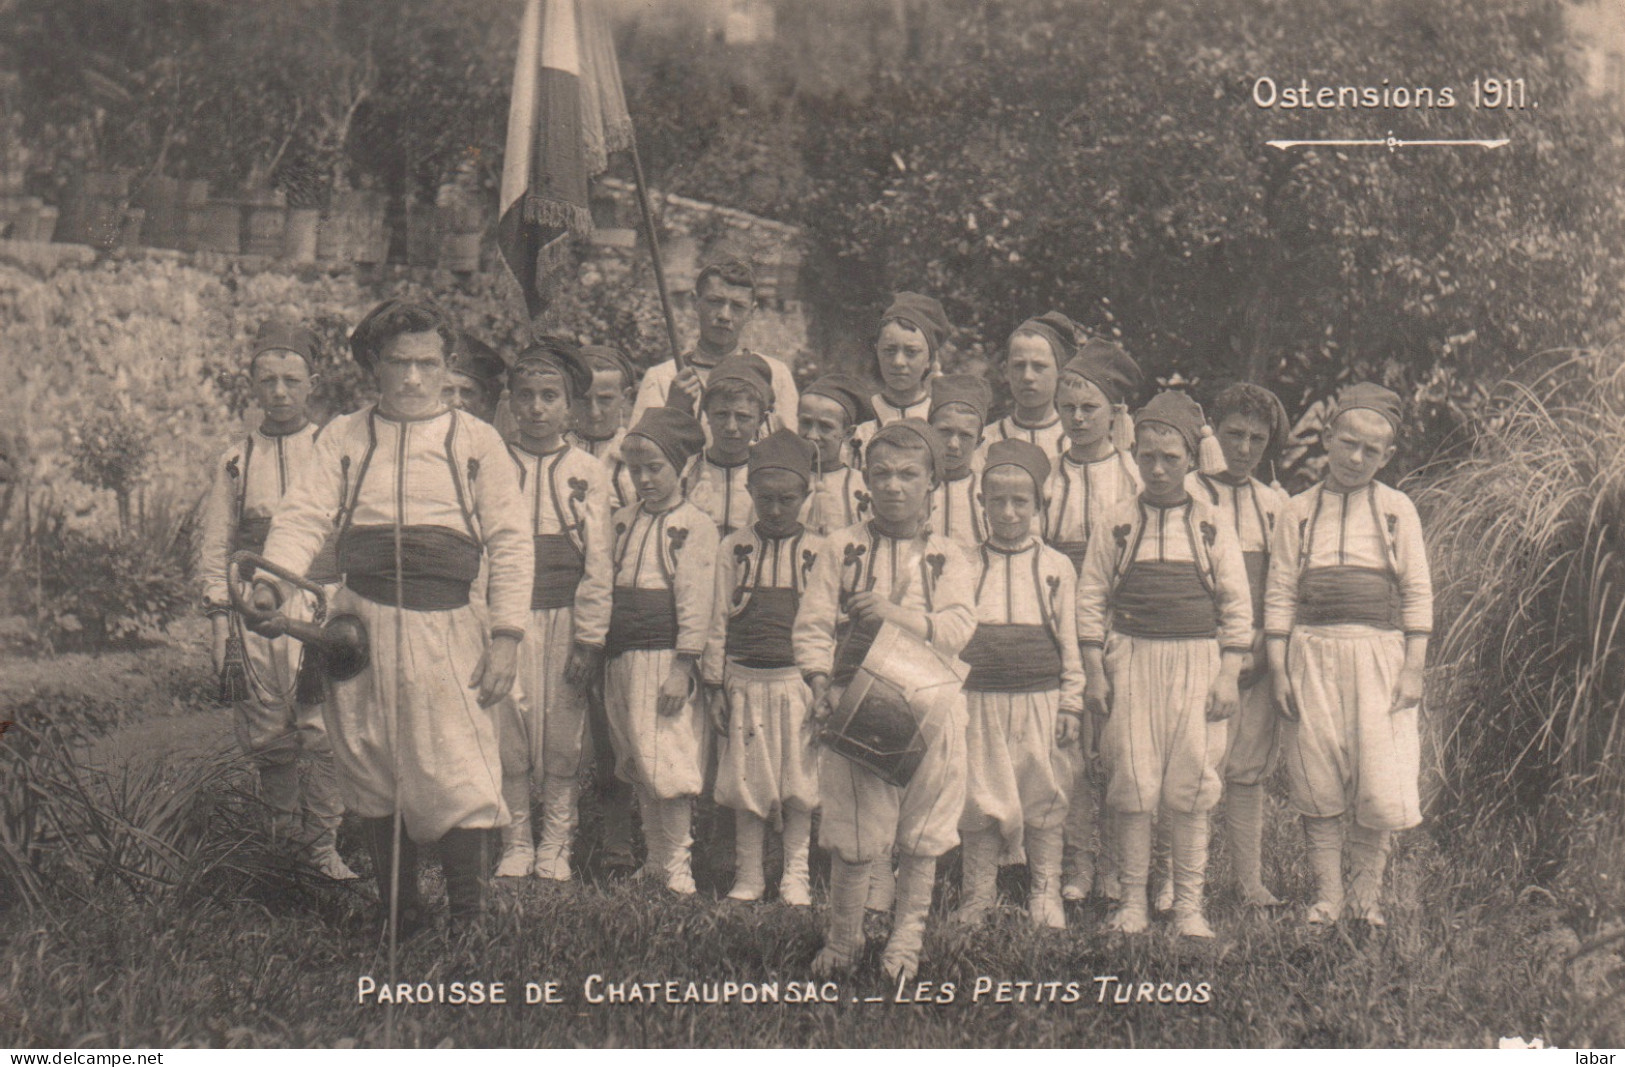 CPA PHOTO CHATEAUPONSAC LES PETITS TURCOS OSTENTIONS 1911 - Chateauponsac